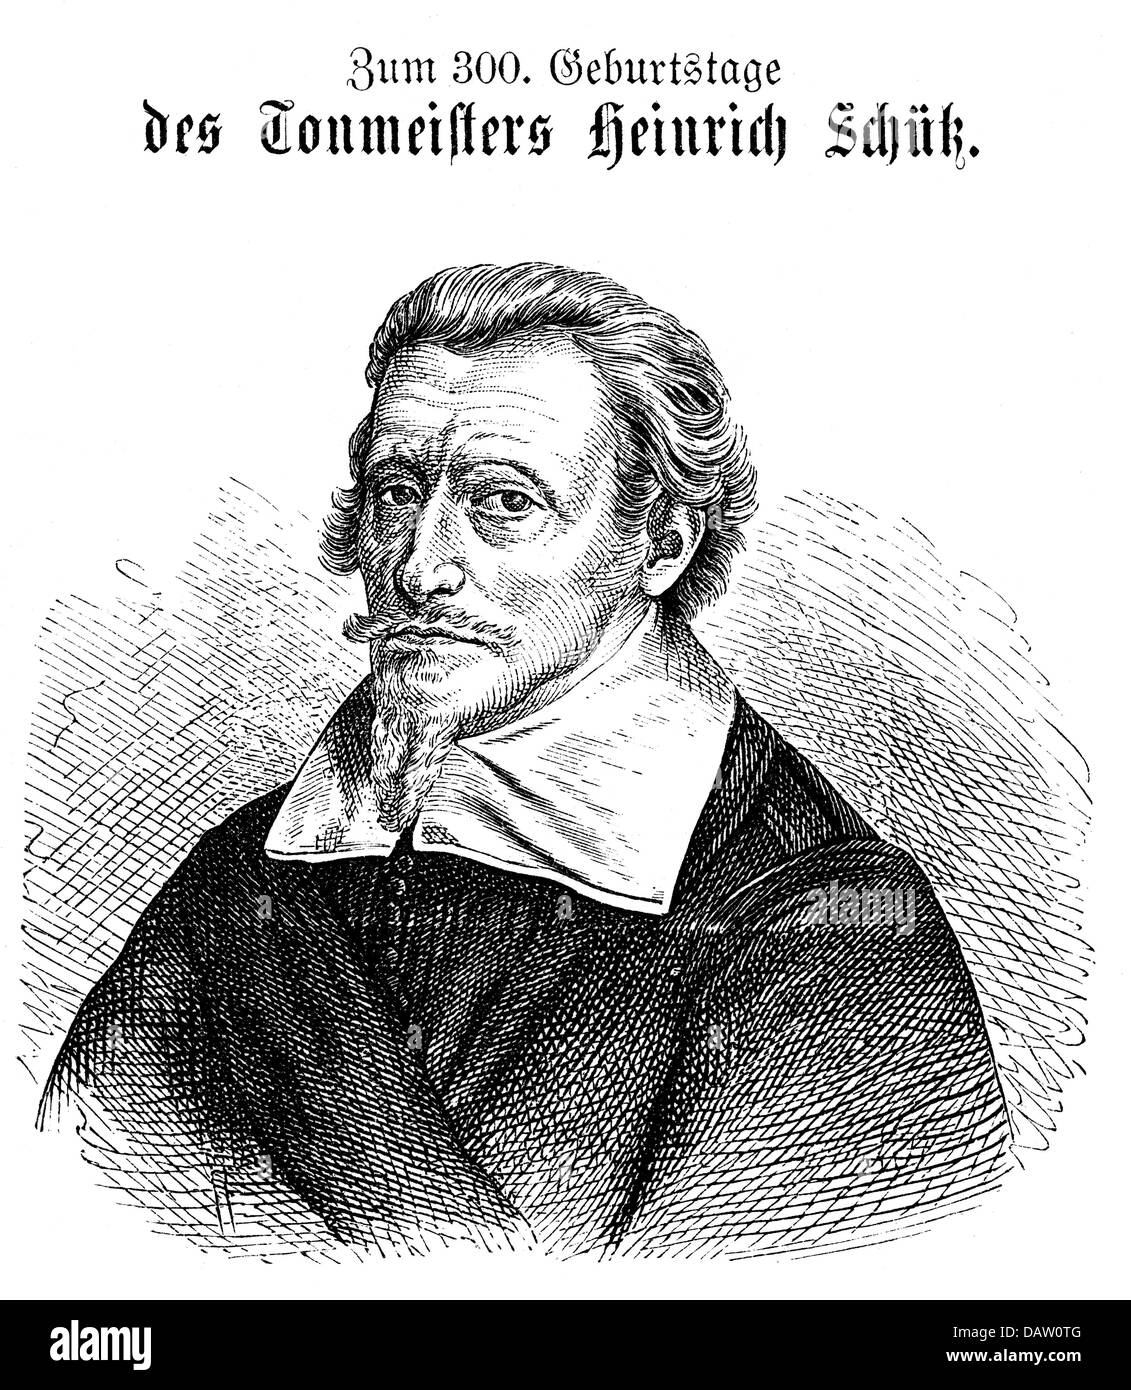 Schuetz, Heinrich, 8.10.1585 - 6.11.1672, German musician (composer), chief bandmaster of the Dresden court music since 1656, portrait, based on contemporary portrait, wood engraving, 1885, Stock Photo